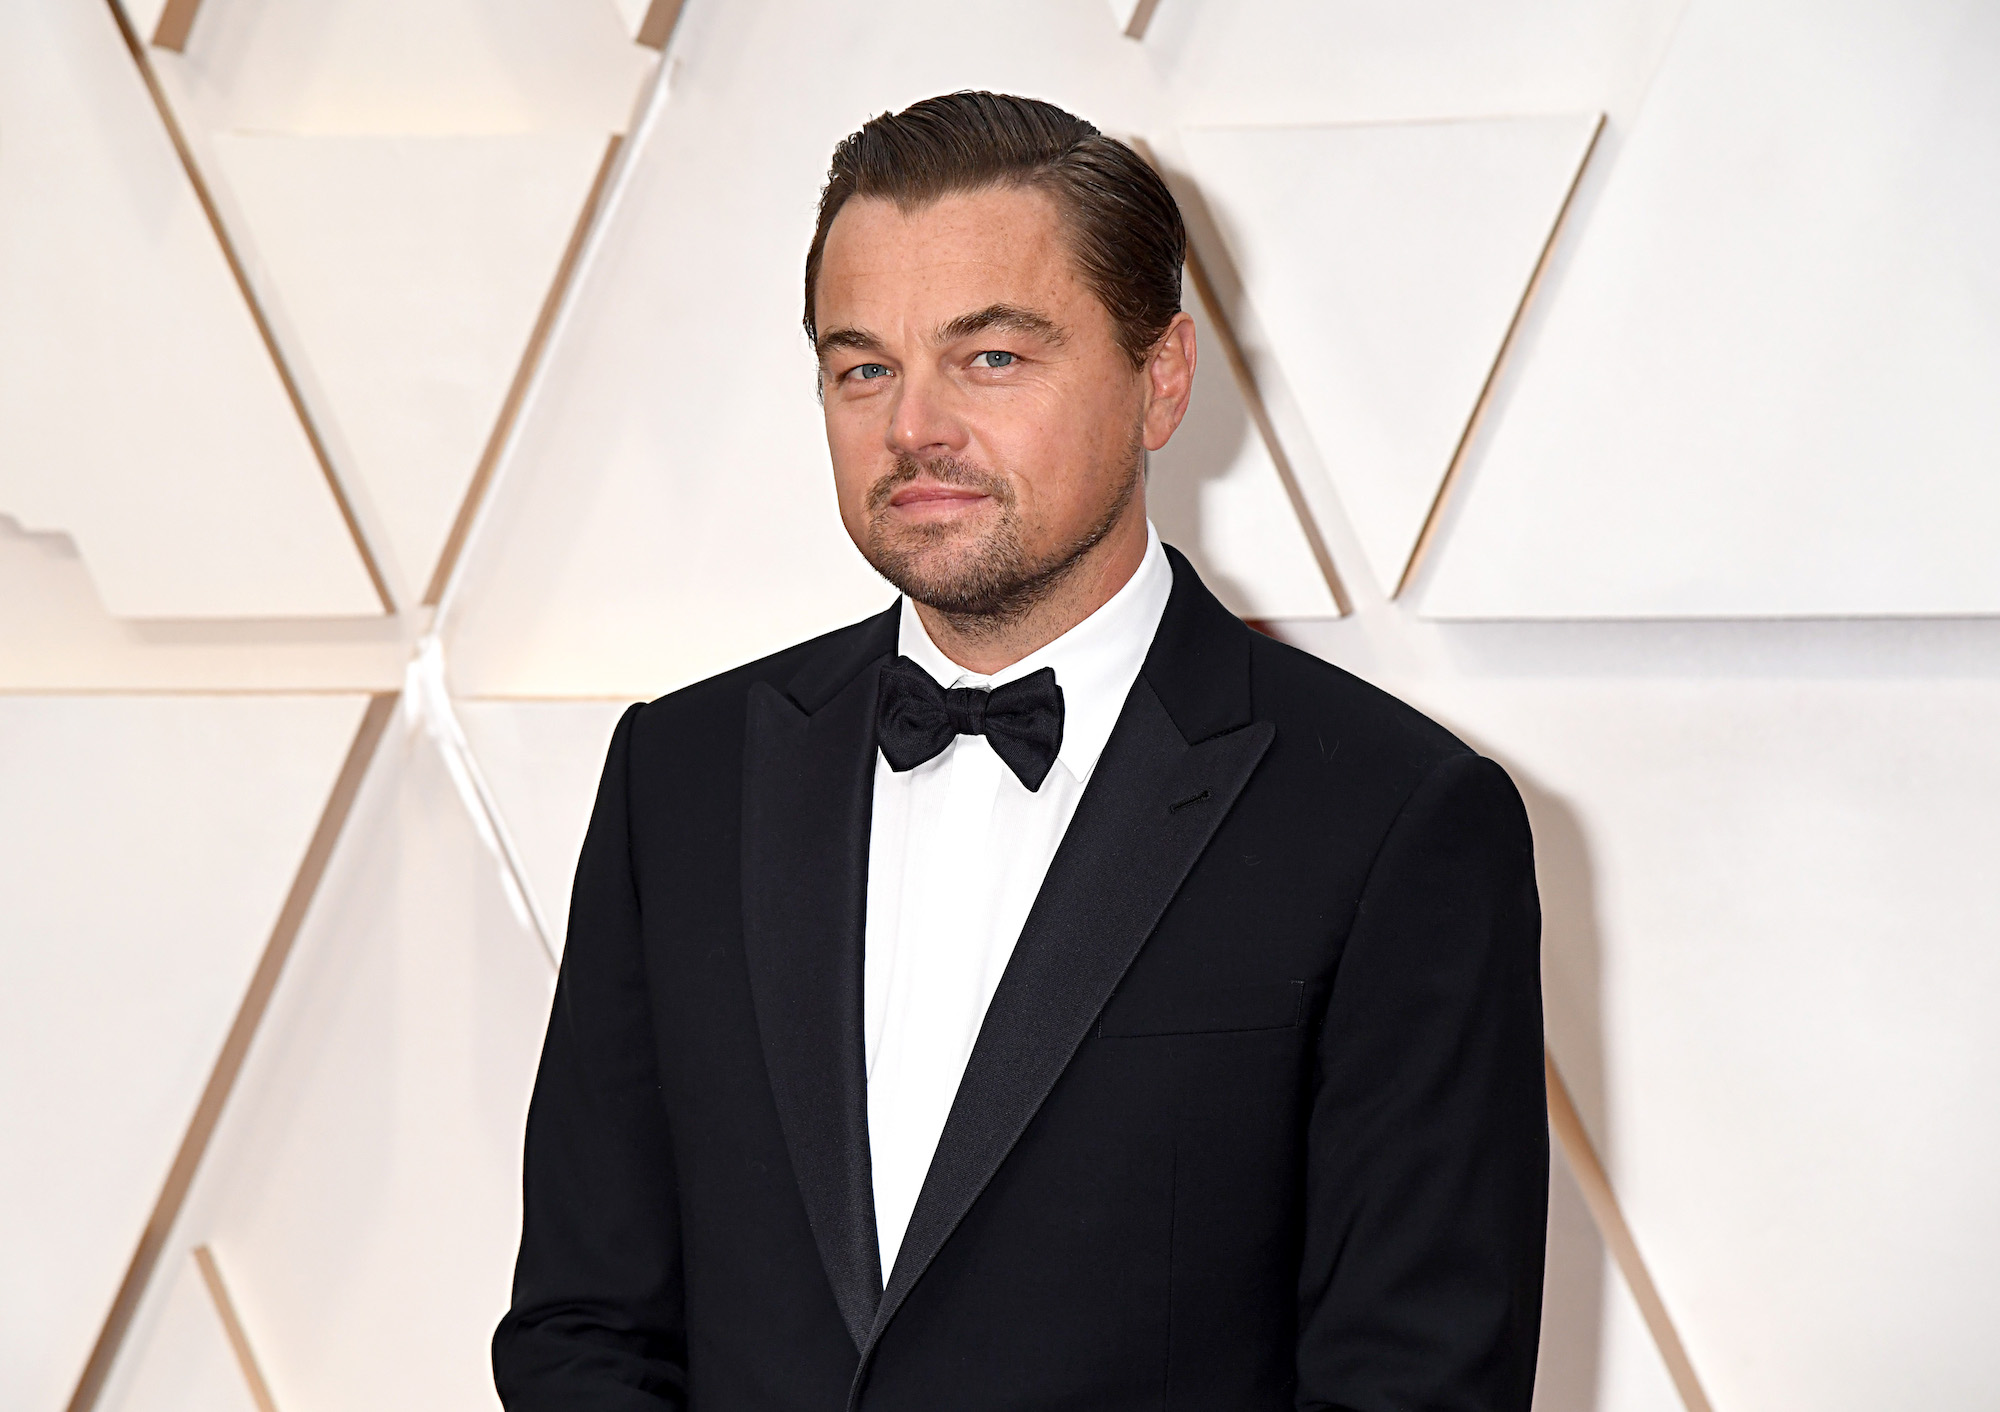 Leonardo DiCaprio smiling in front of a white background